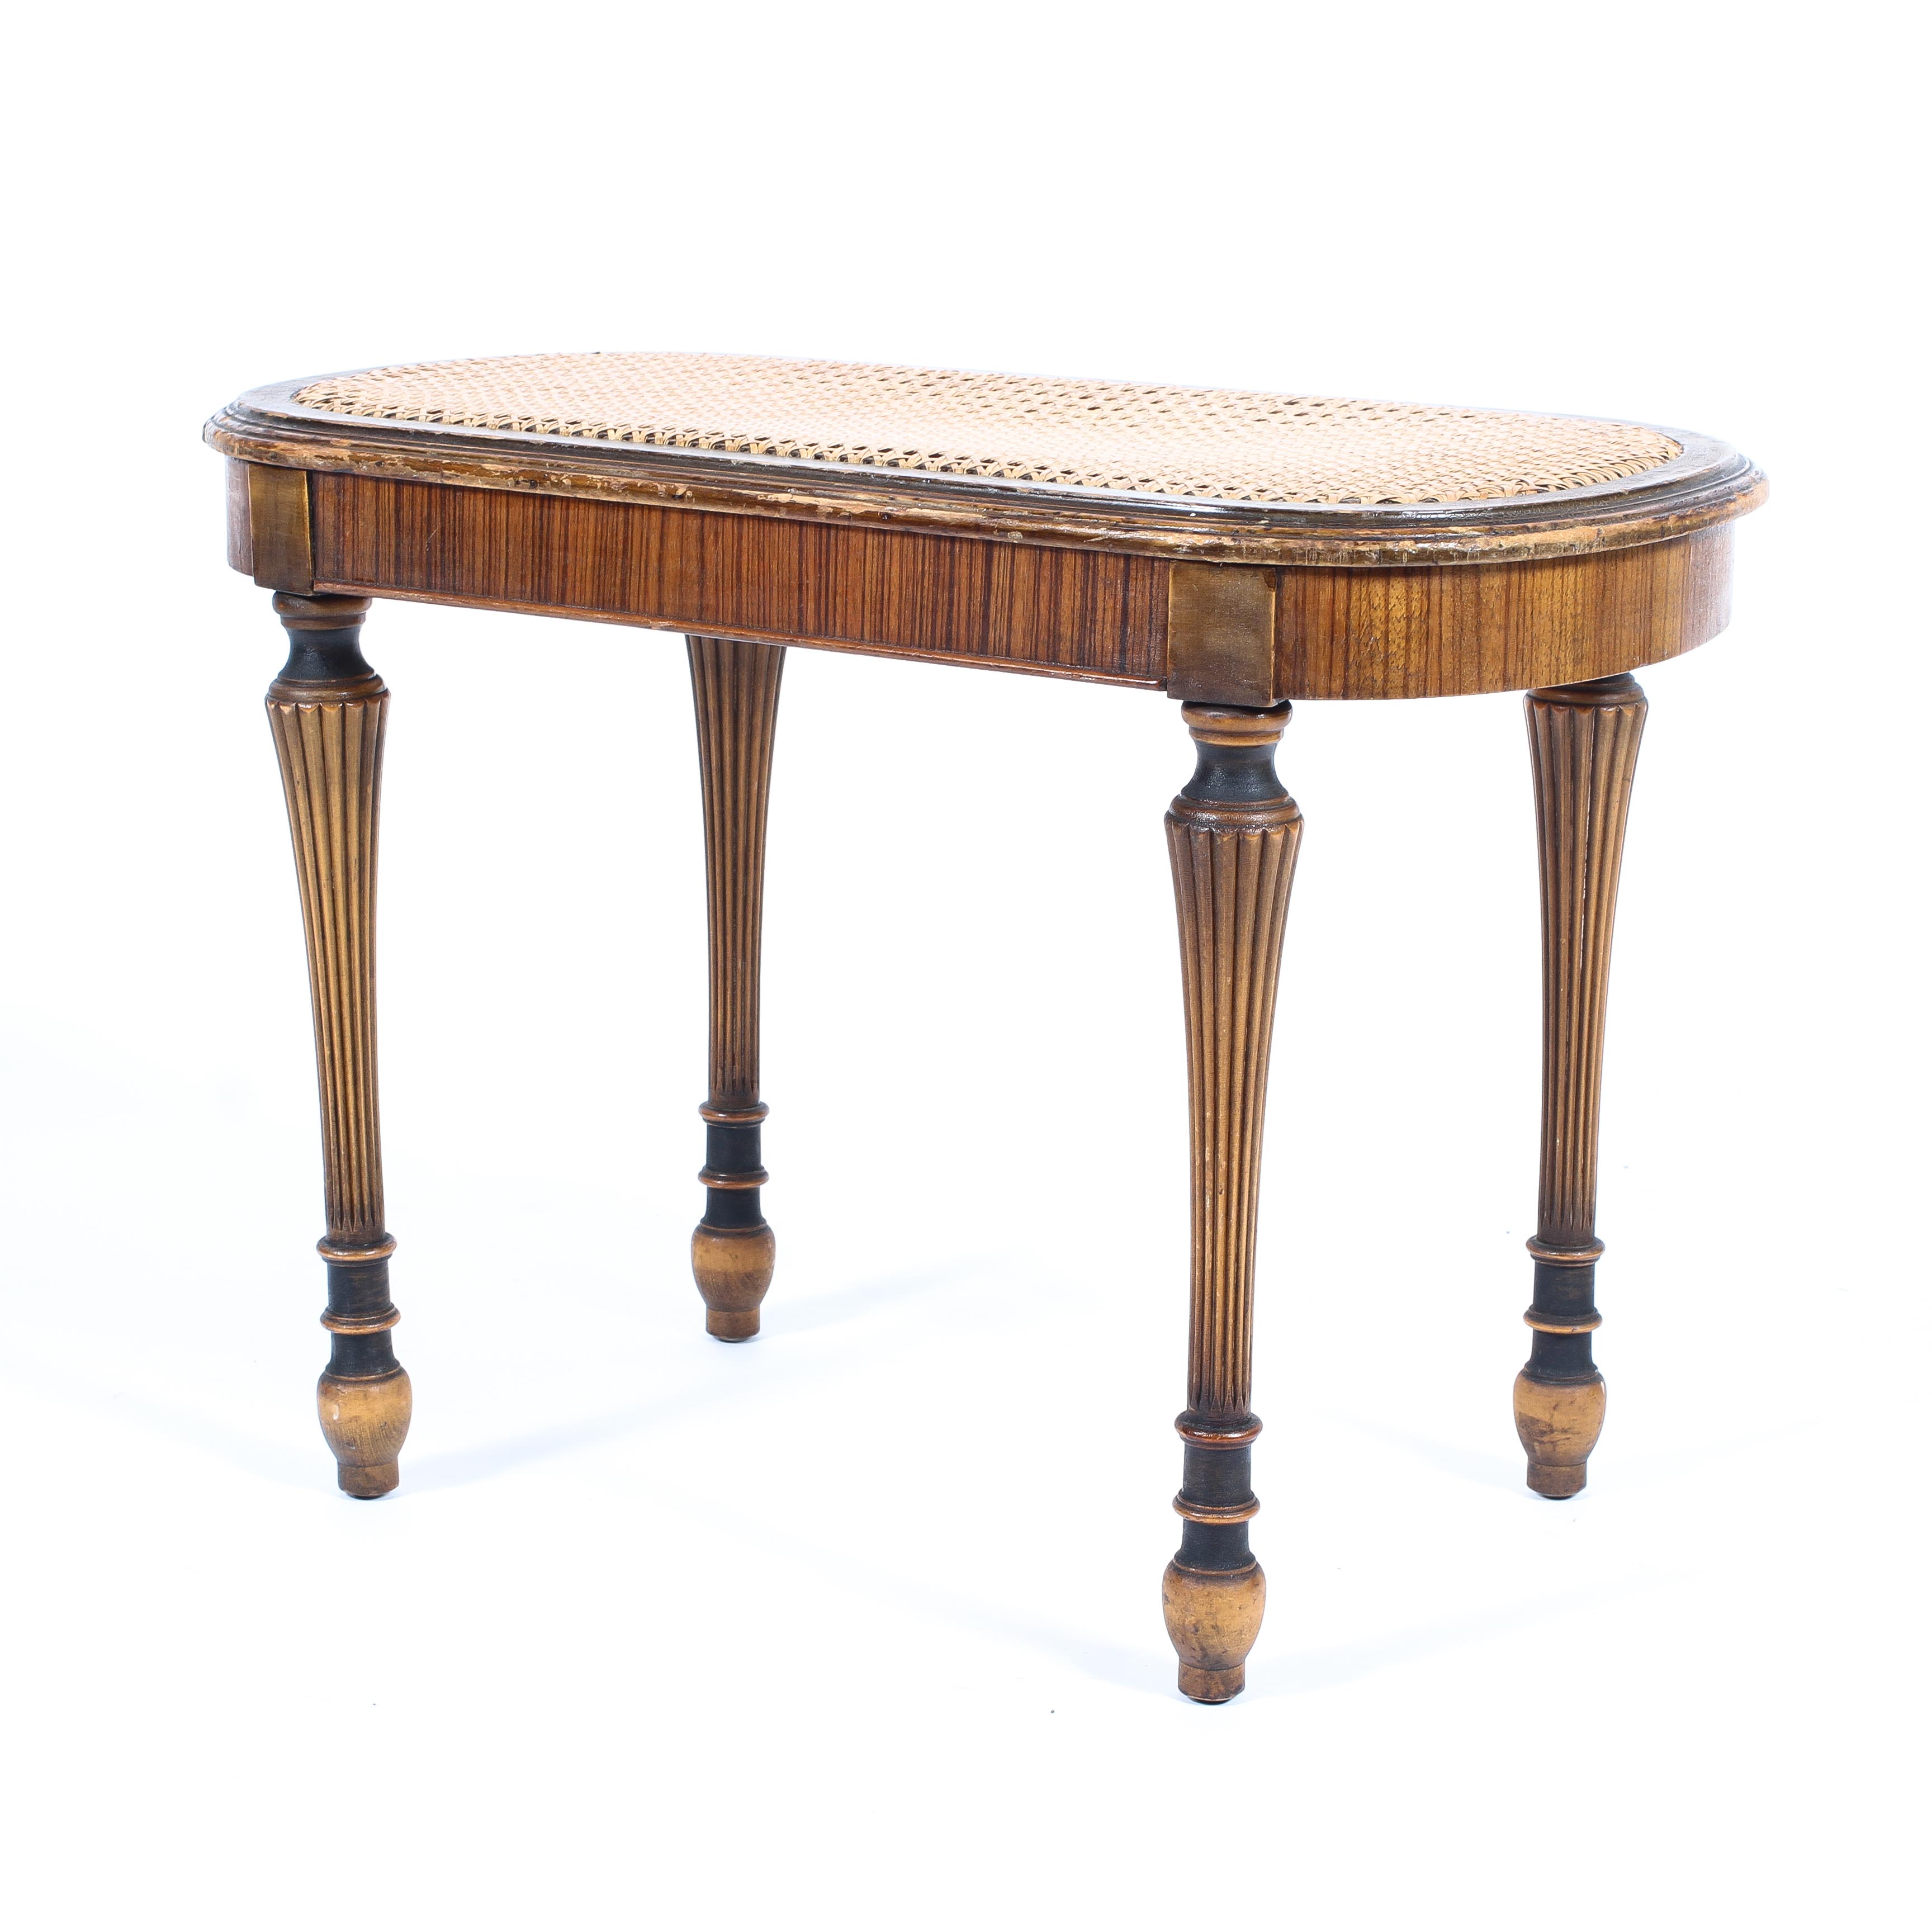 A small caned shaped regency style stool original markers label Berkey & Gay furniture.